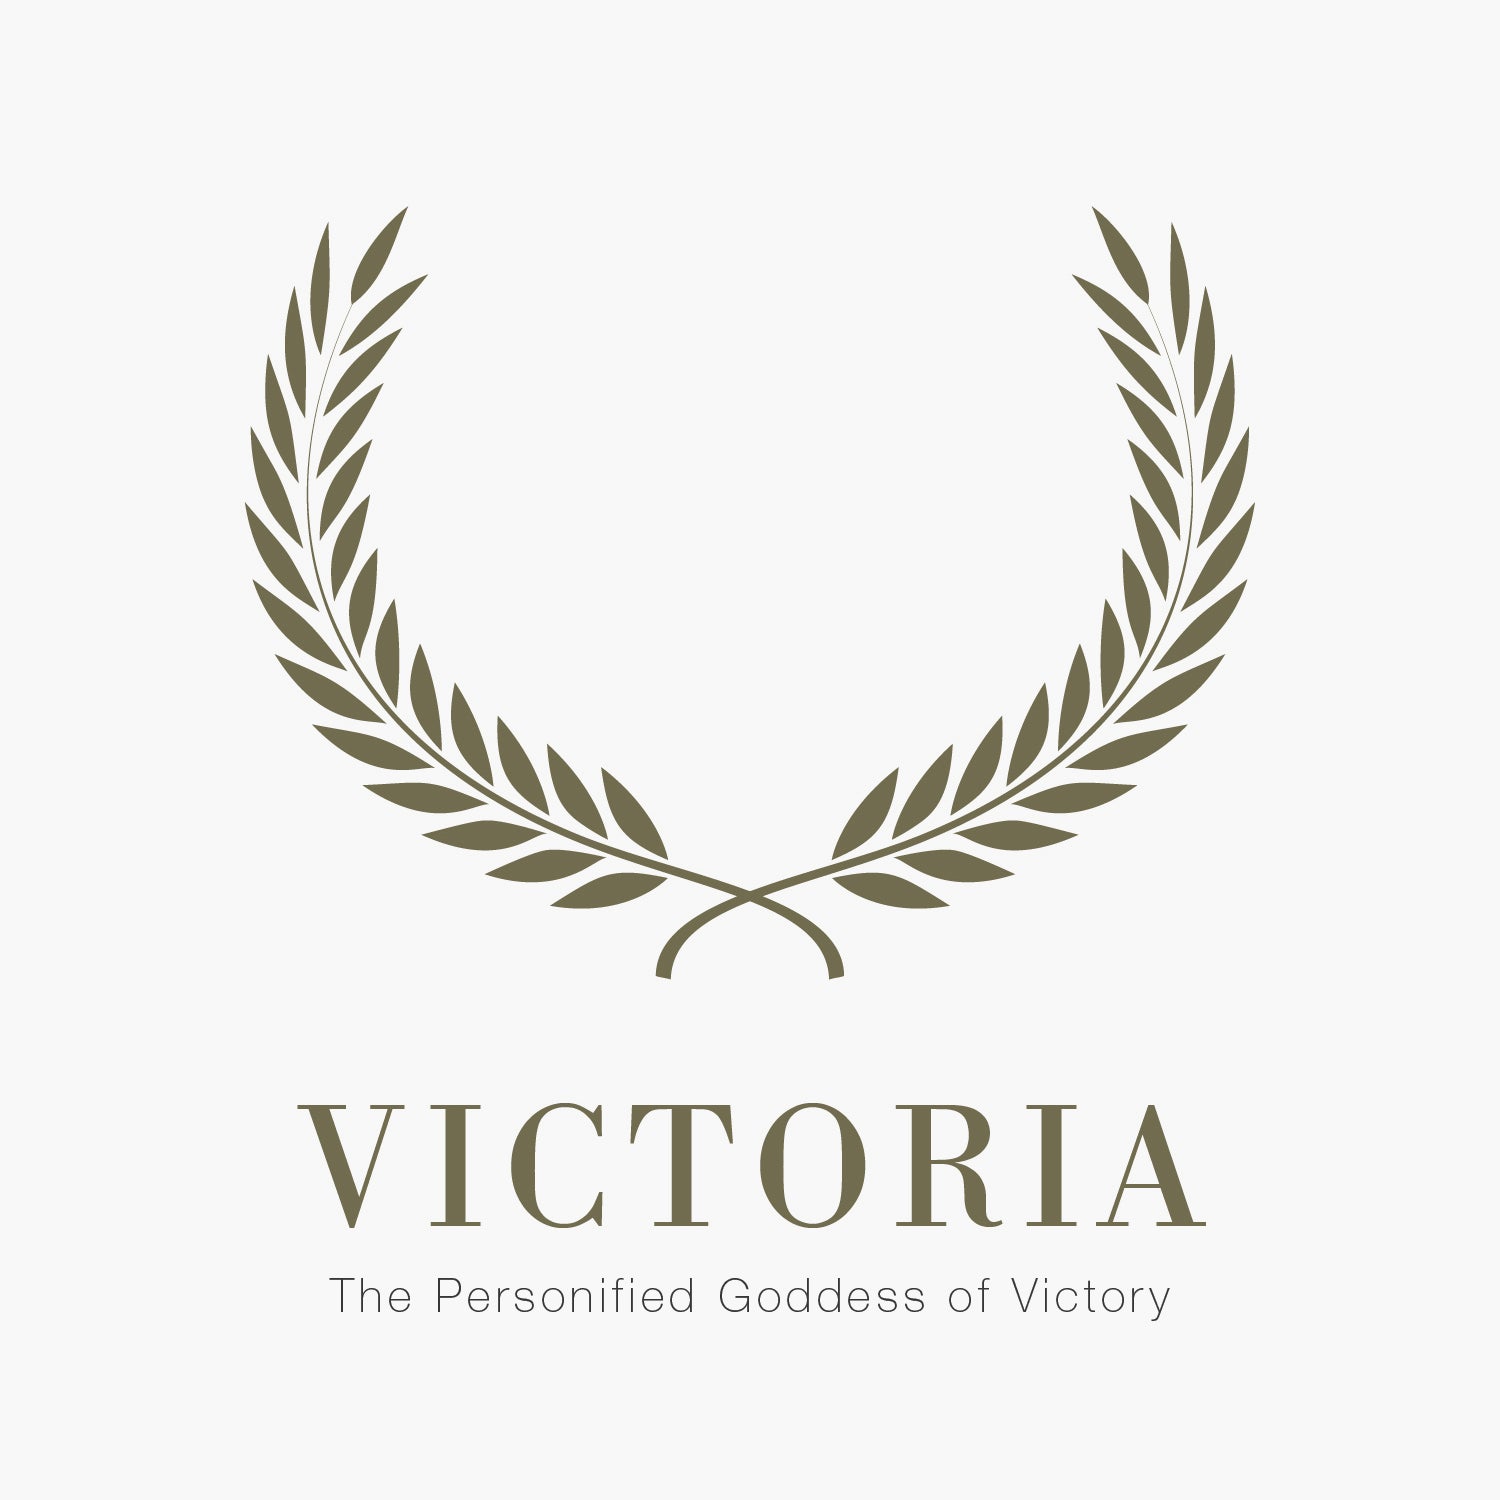 Victoria - The Personified Goddess of Victory